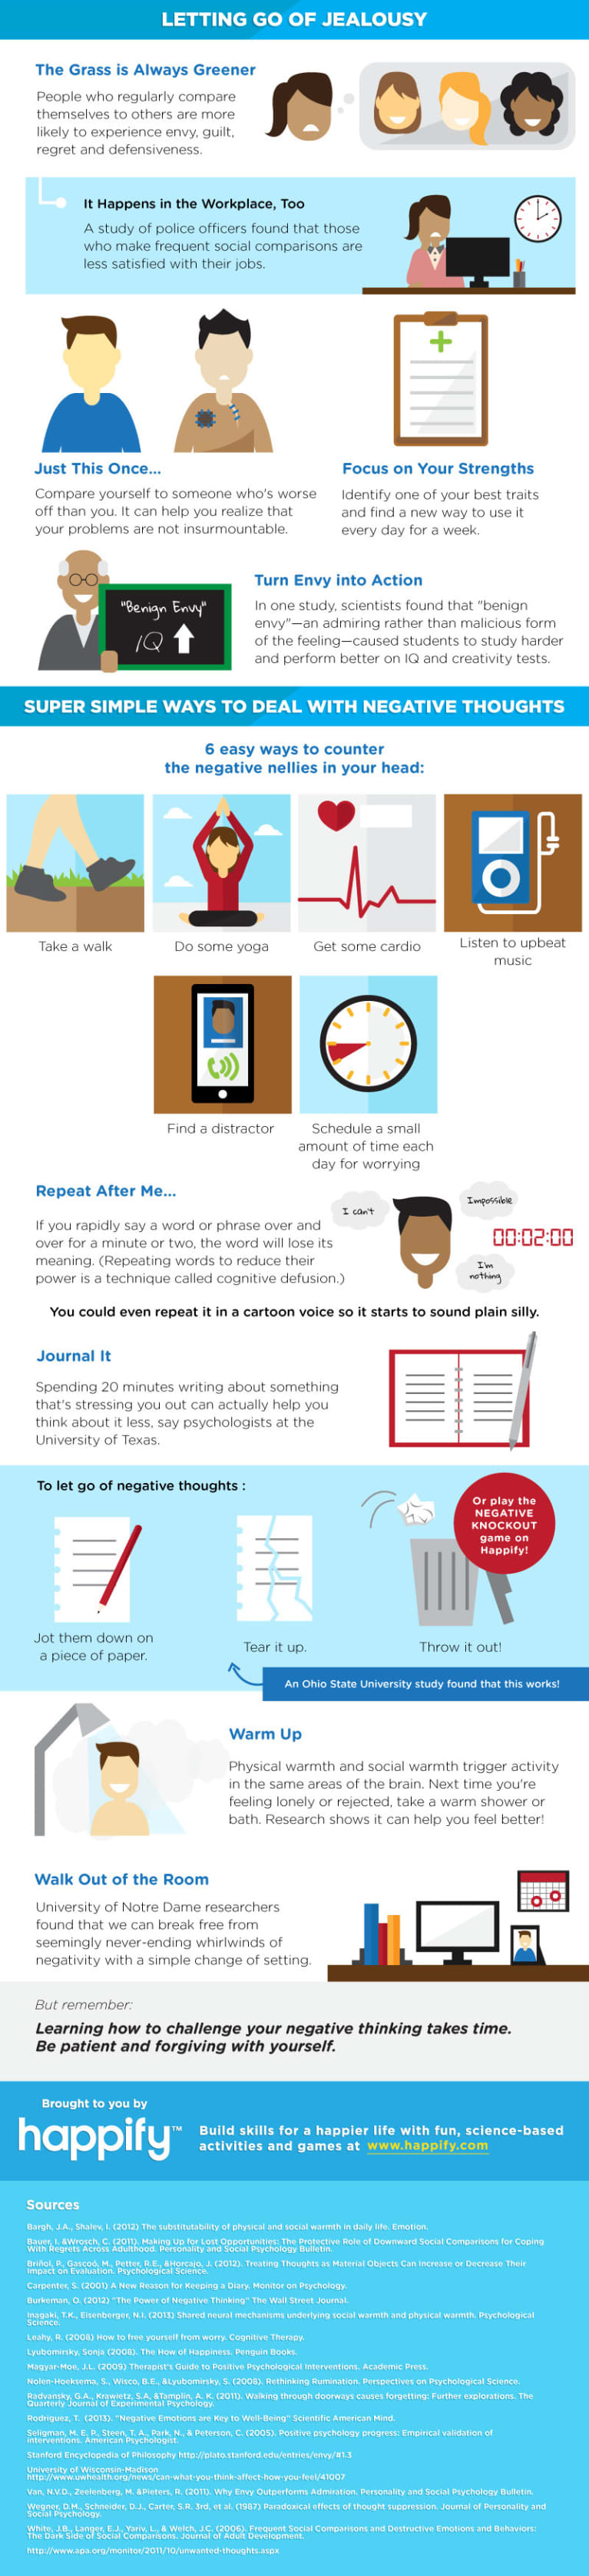 How To Stop Negative Thoughts From Getting You Down (Infographic)